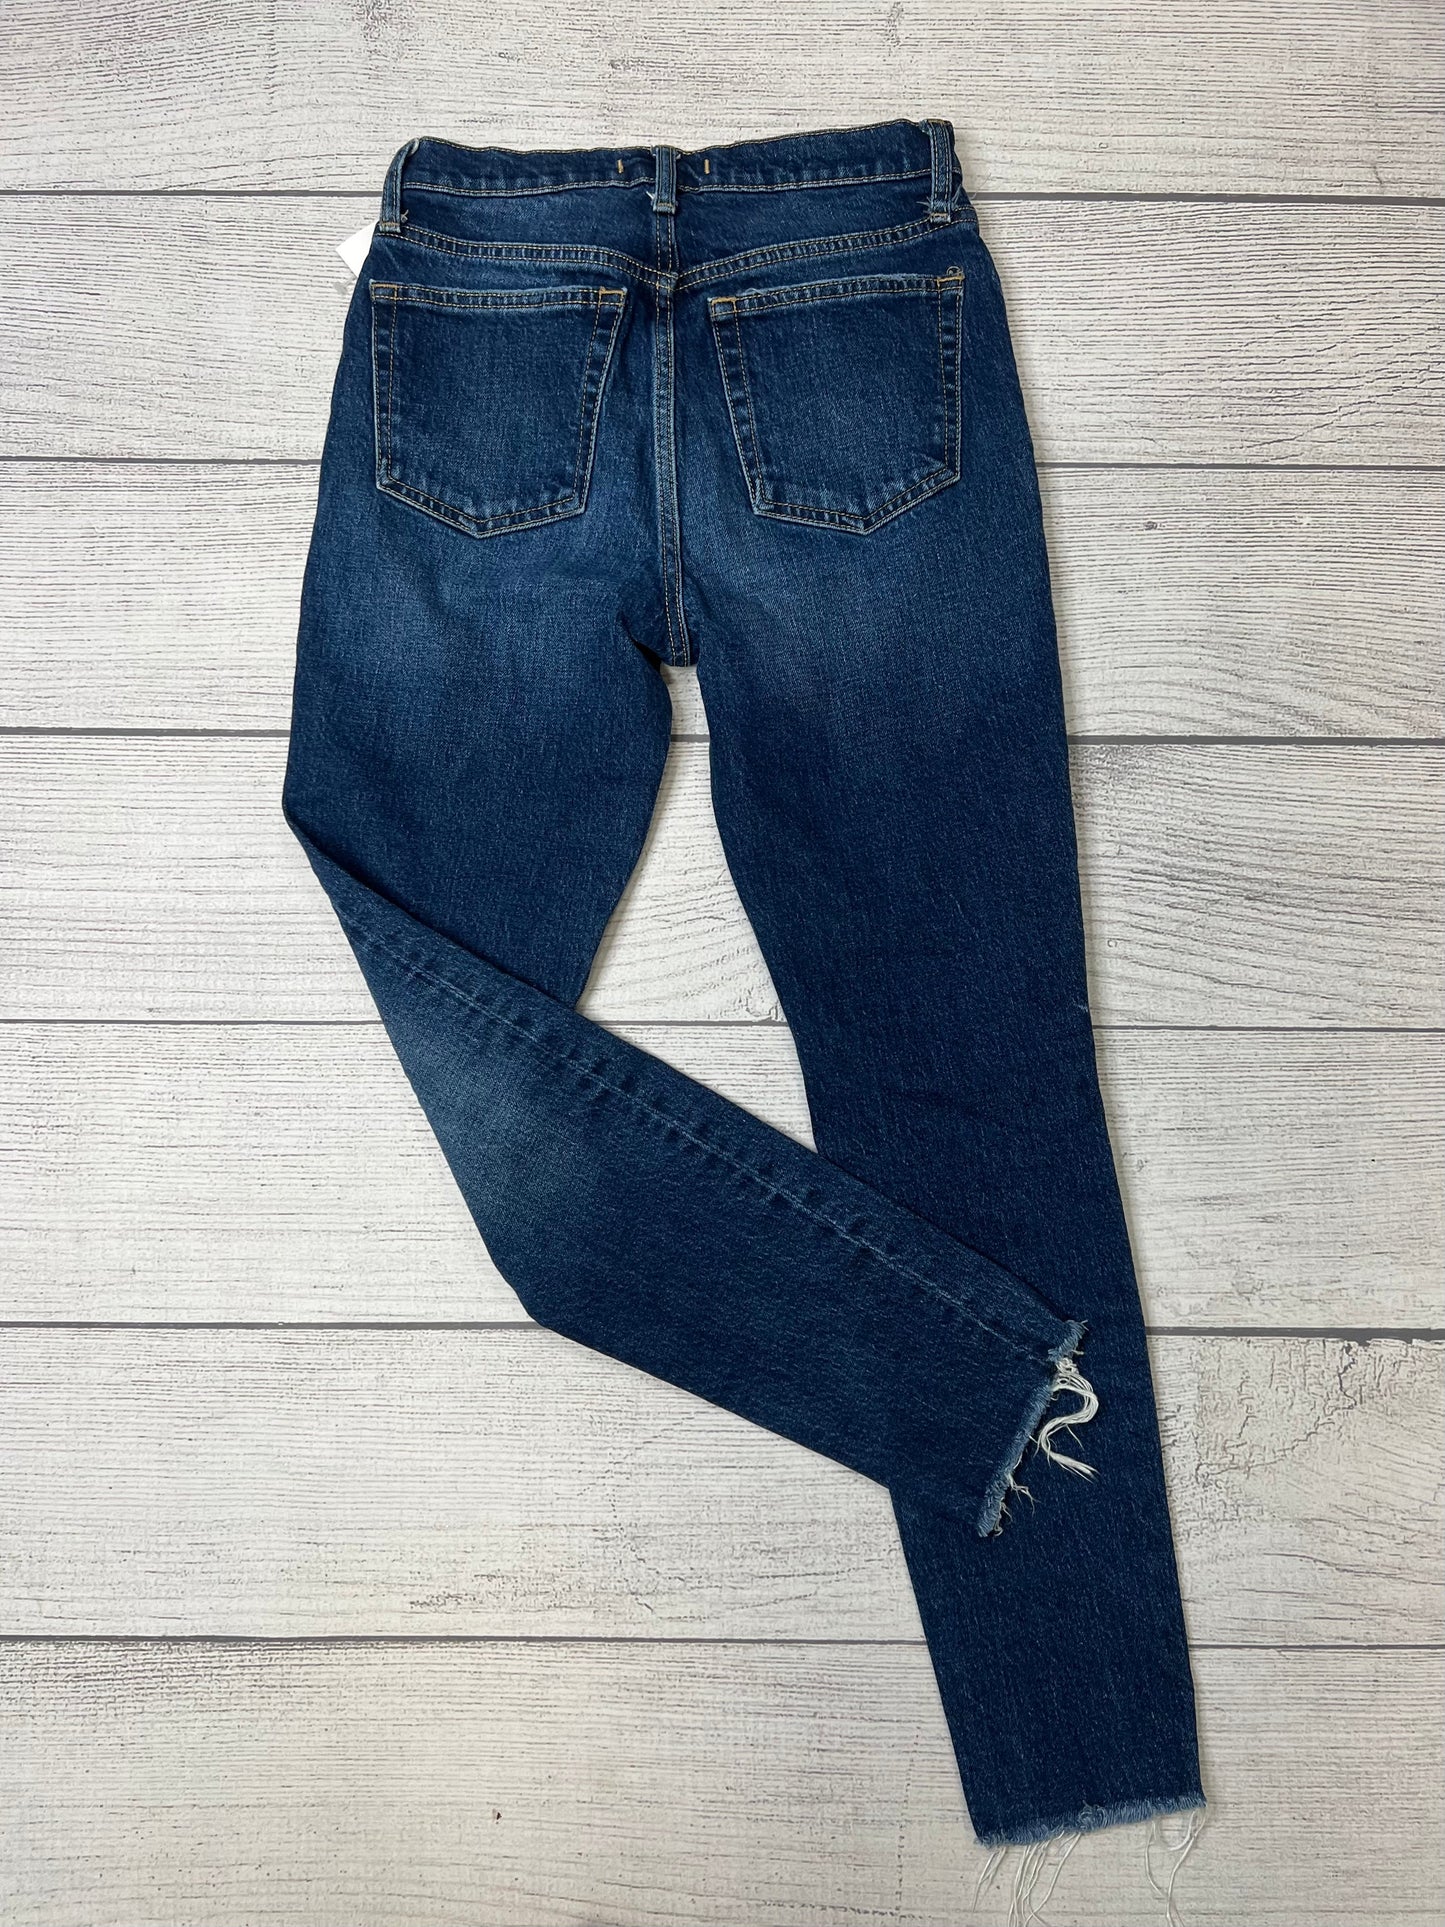 Jeans Skinny By We The Free  Size: 4